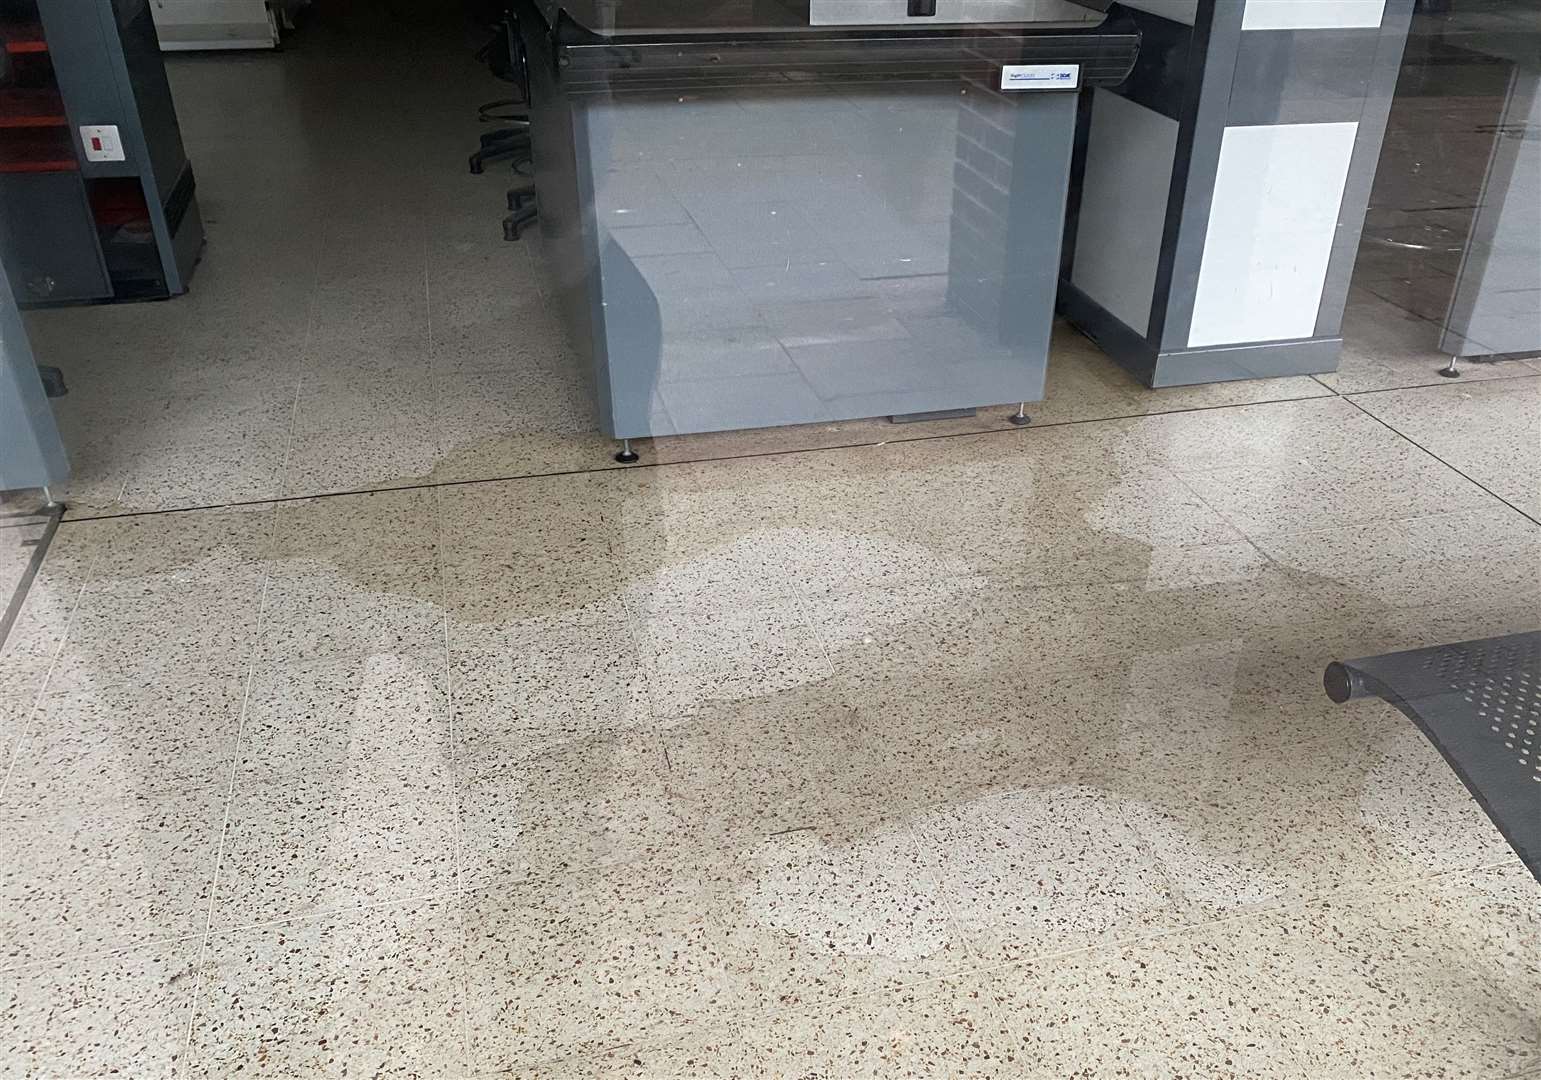 The water can be seen flowing under the till cabinets